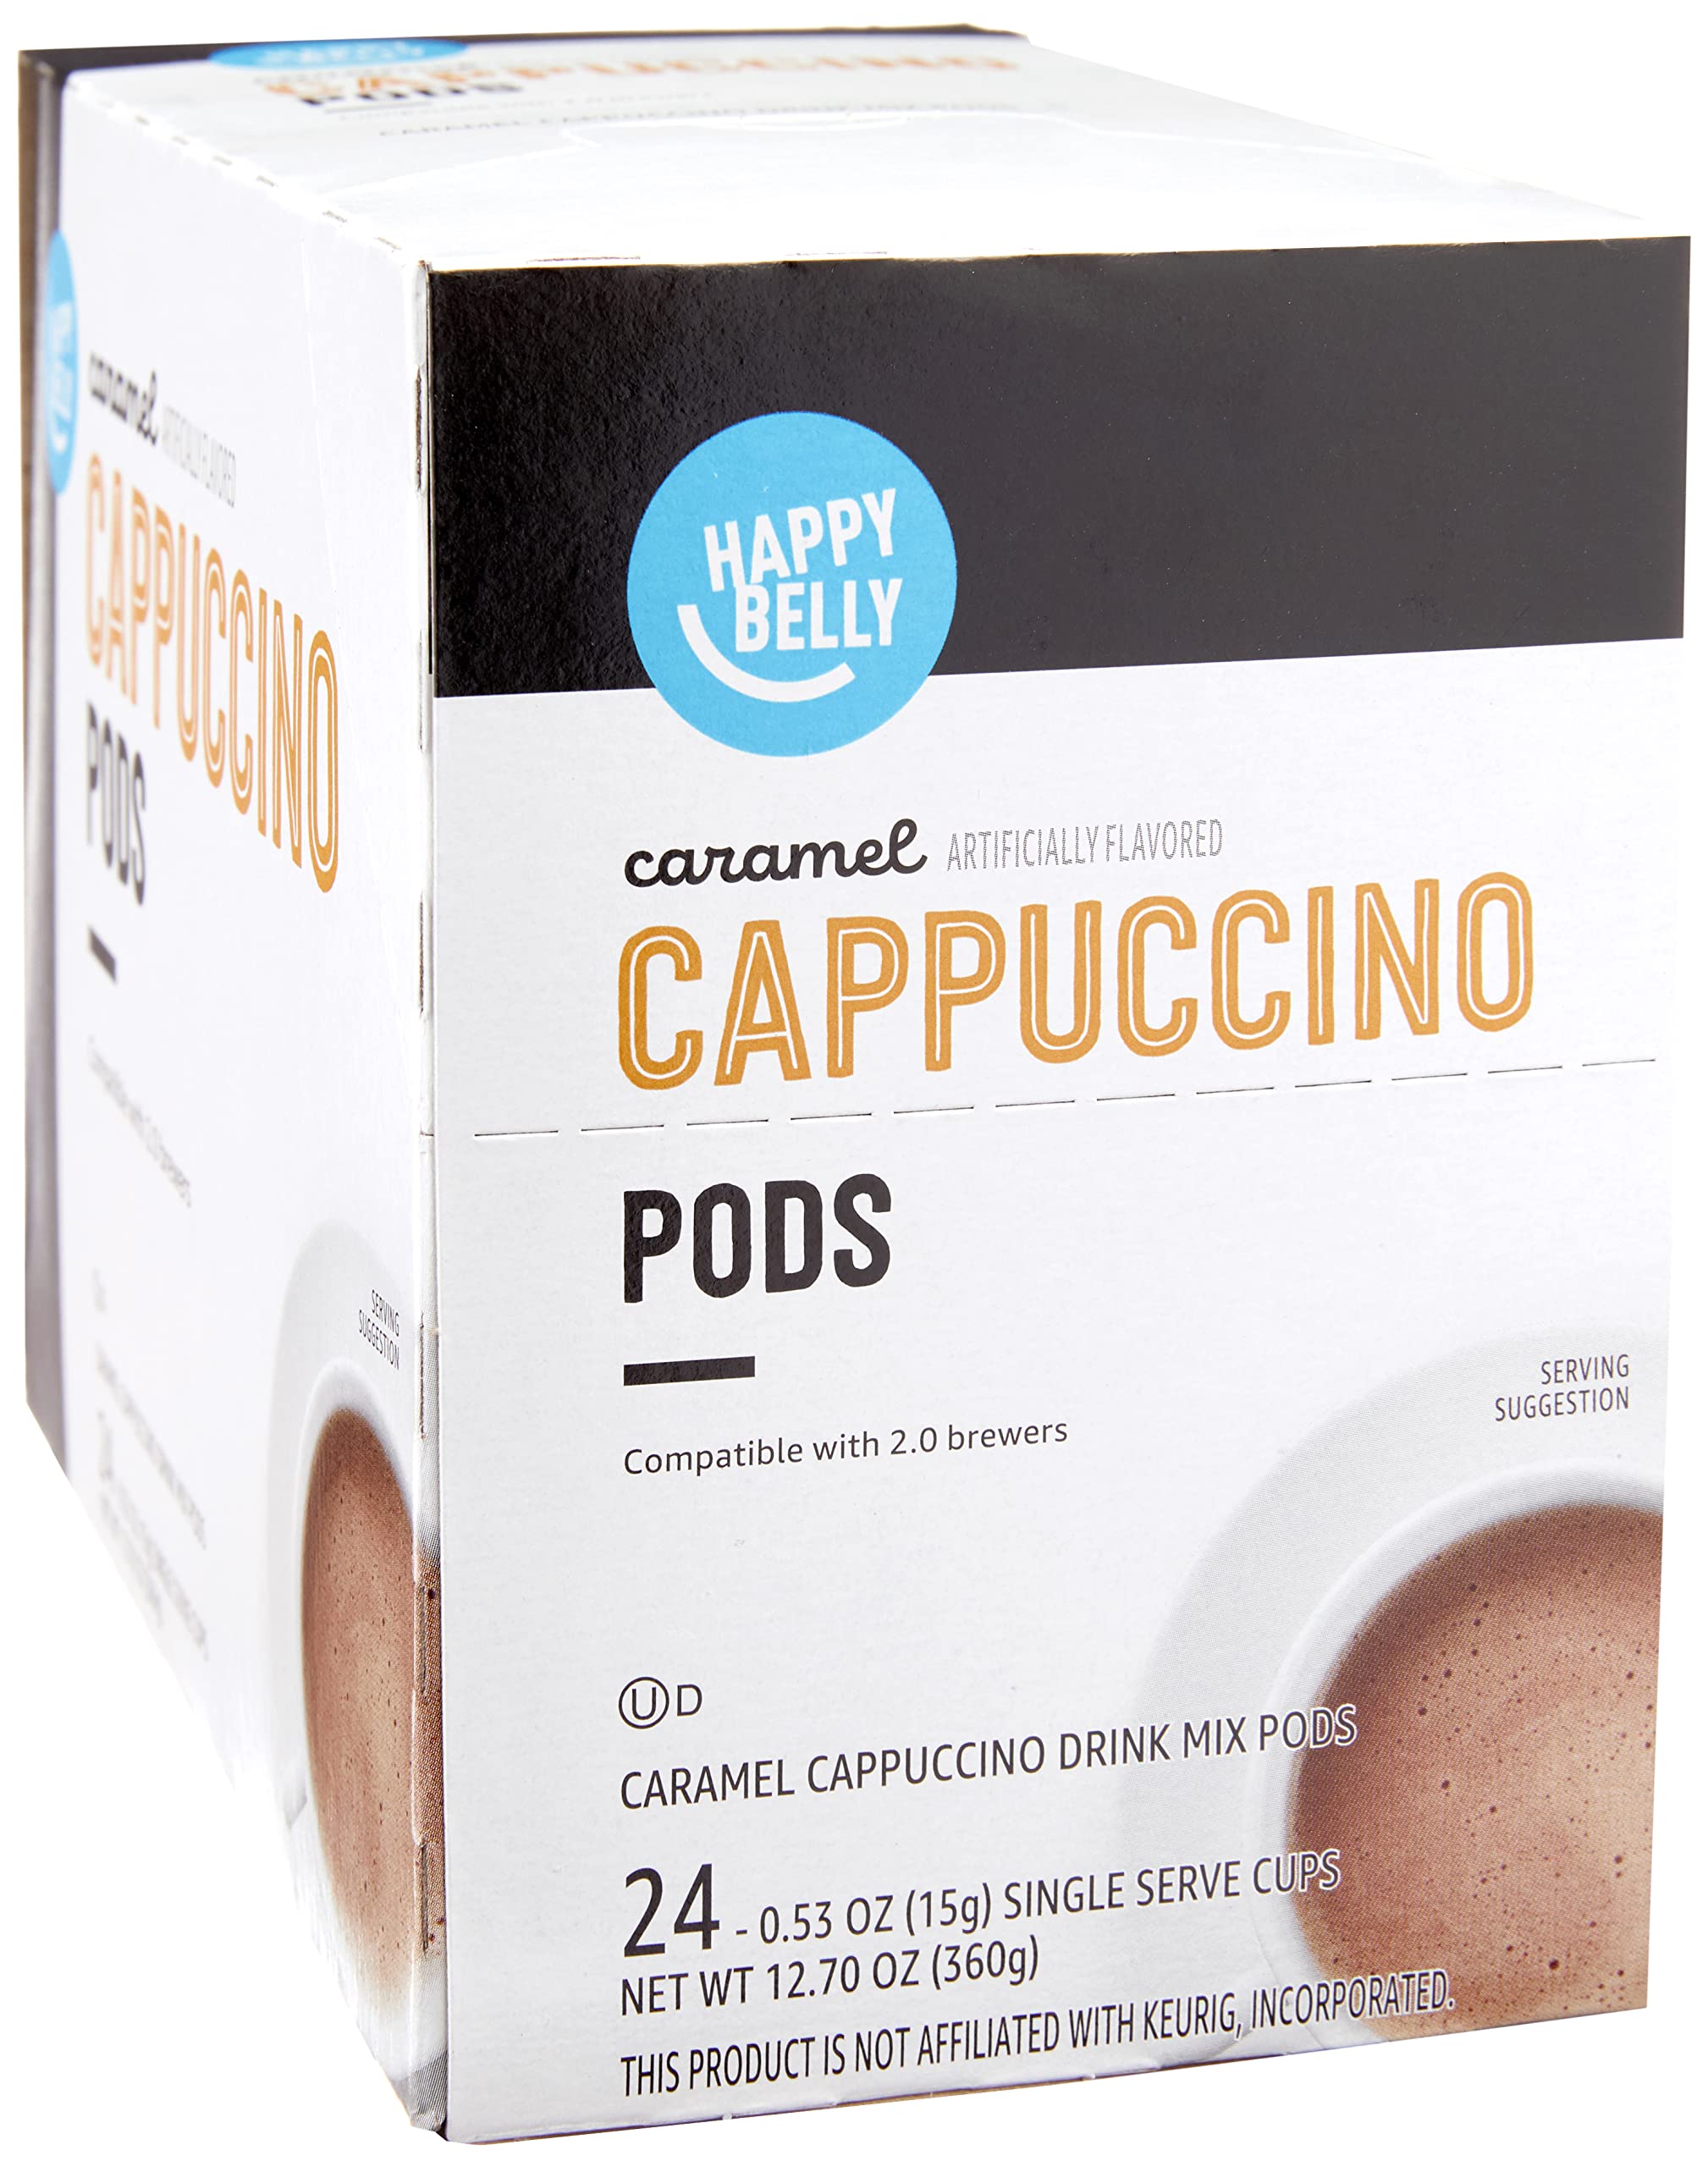 24-Count Amazon Happy Belly Cappuccino Coffee Pods: Caramel $7.41 ($0.31 each), French Vanilla $7.40 ($0.31 each) + Free Shipping w/ Prime or on $35+